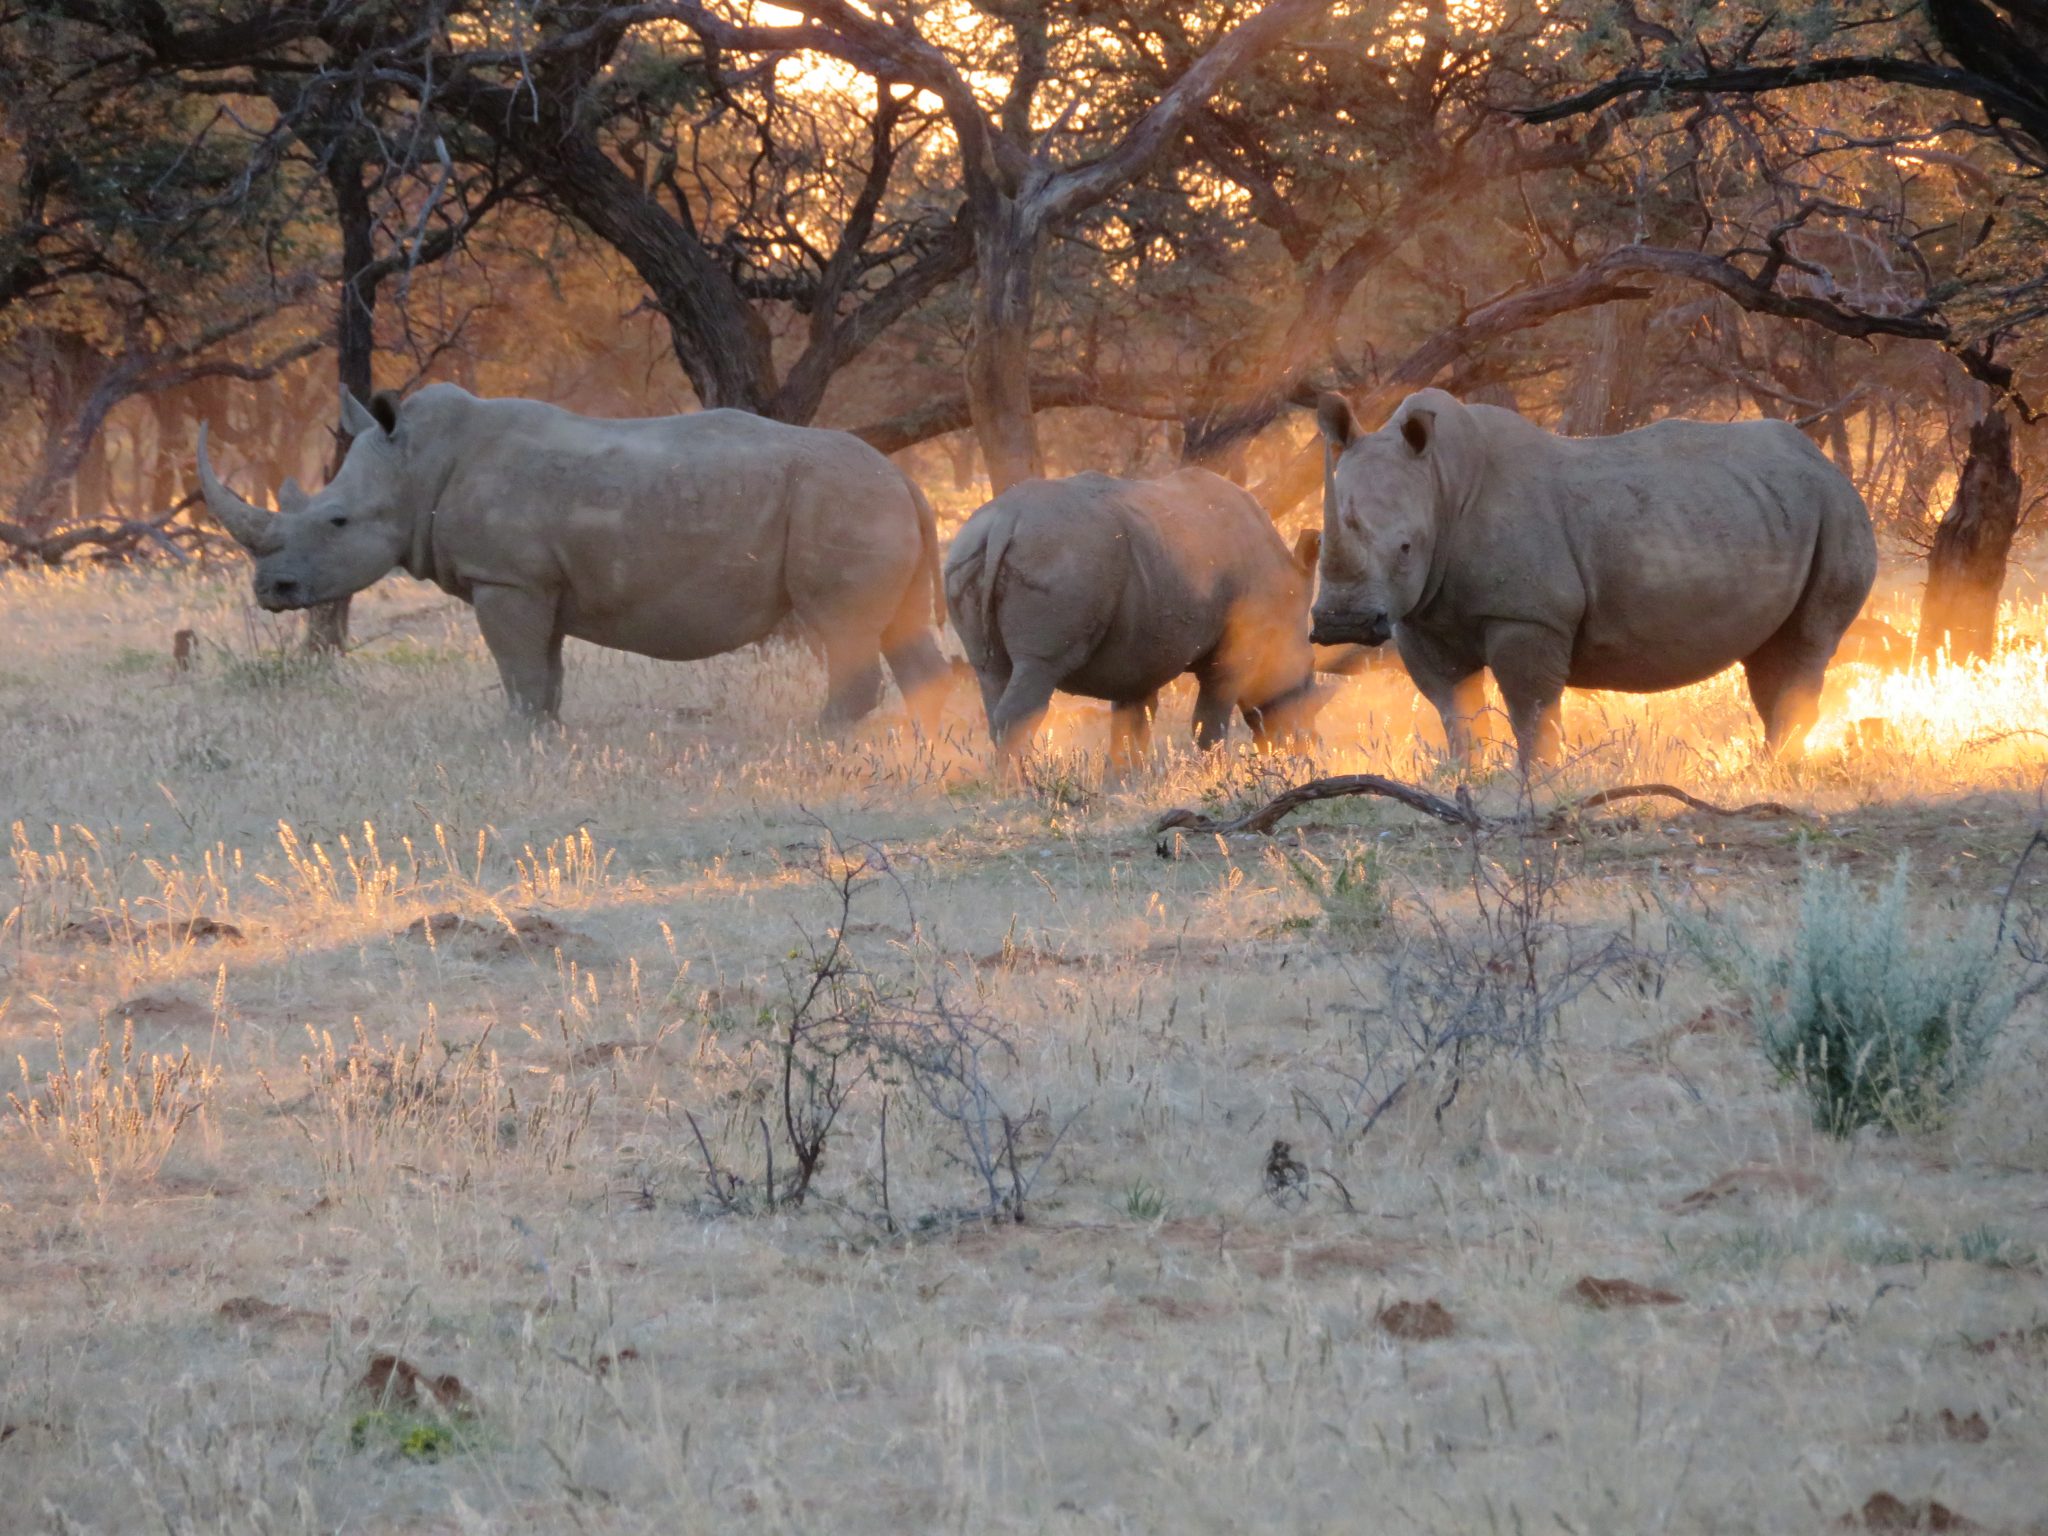 Drones can help protect rhinos in real-time with text messages!